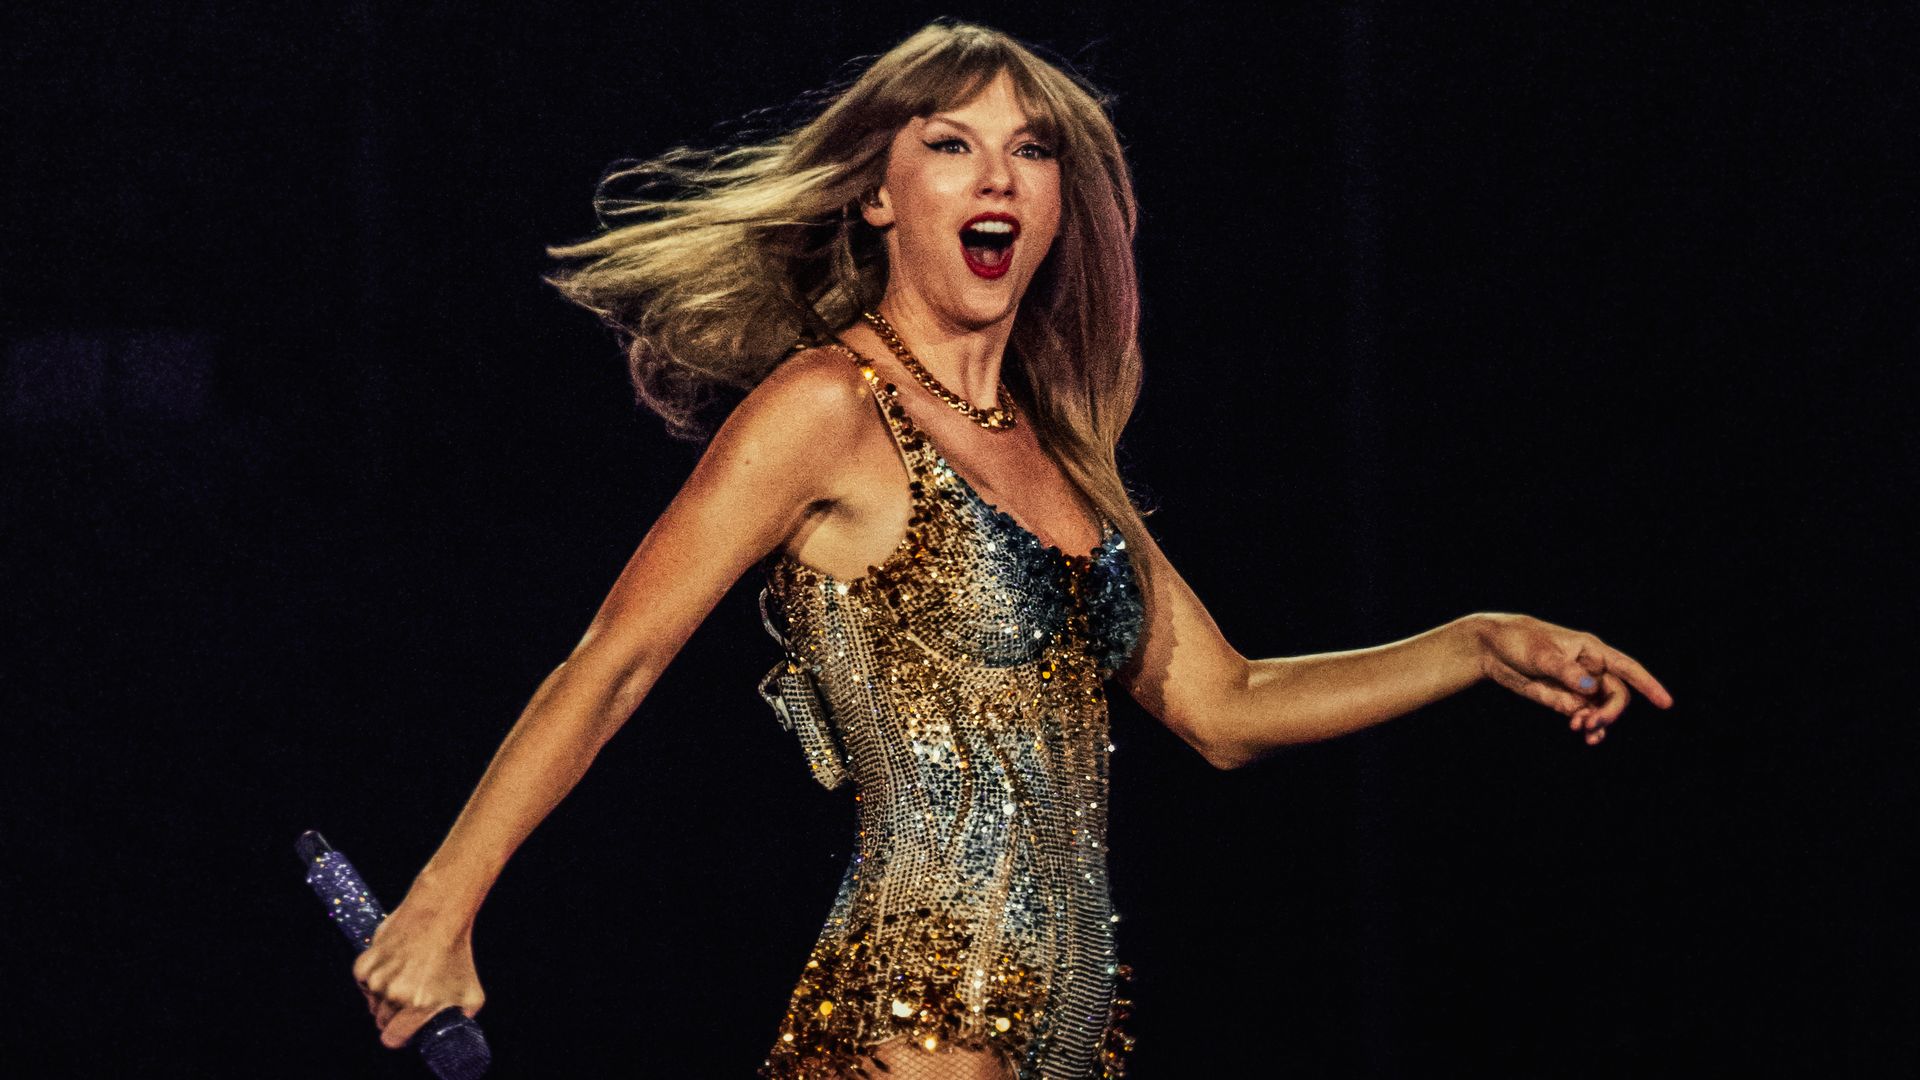 Before her billion dollar Era's Tour, Taylor Swift put in absolute WOR, Taylor Swift Posture